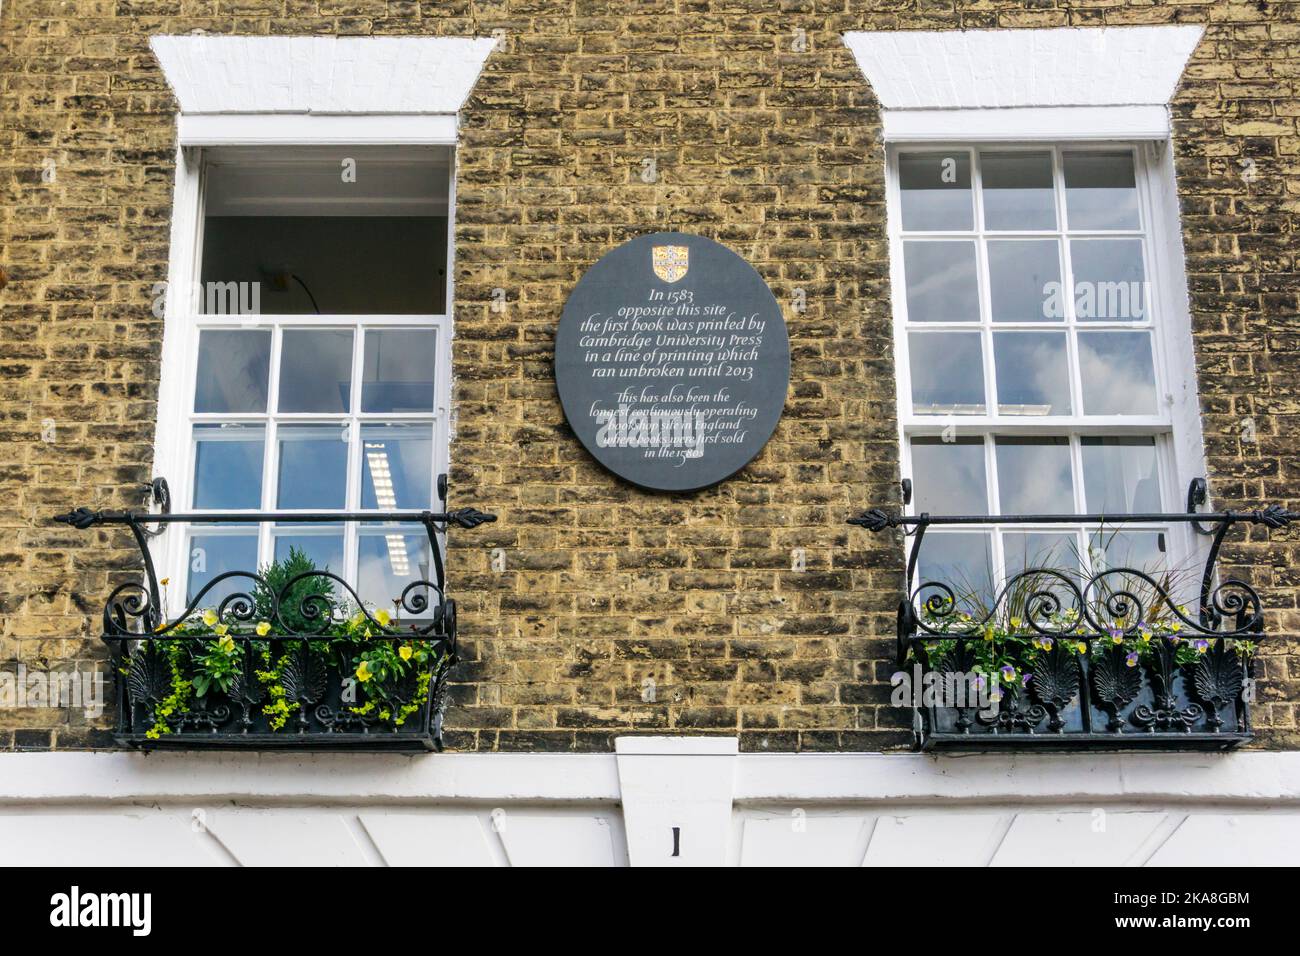 A plaque in Trinity Street, Cambridge, marks the nearby first location of the Cambridge University Press in 1583. Stock Photo